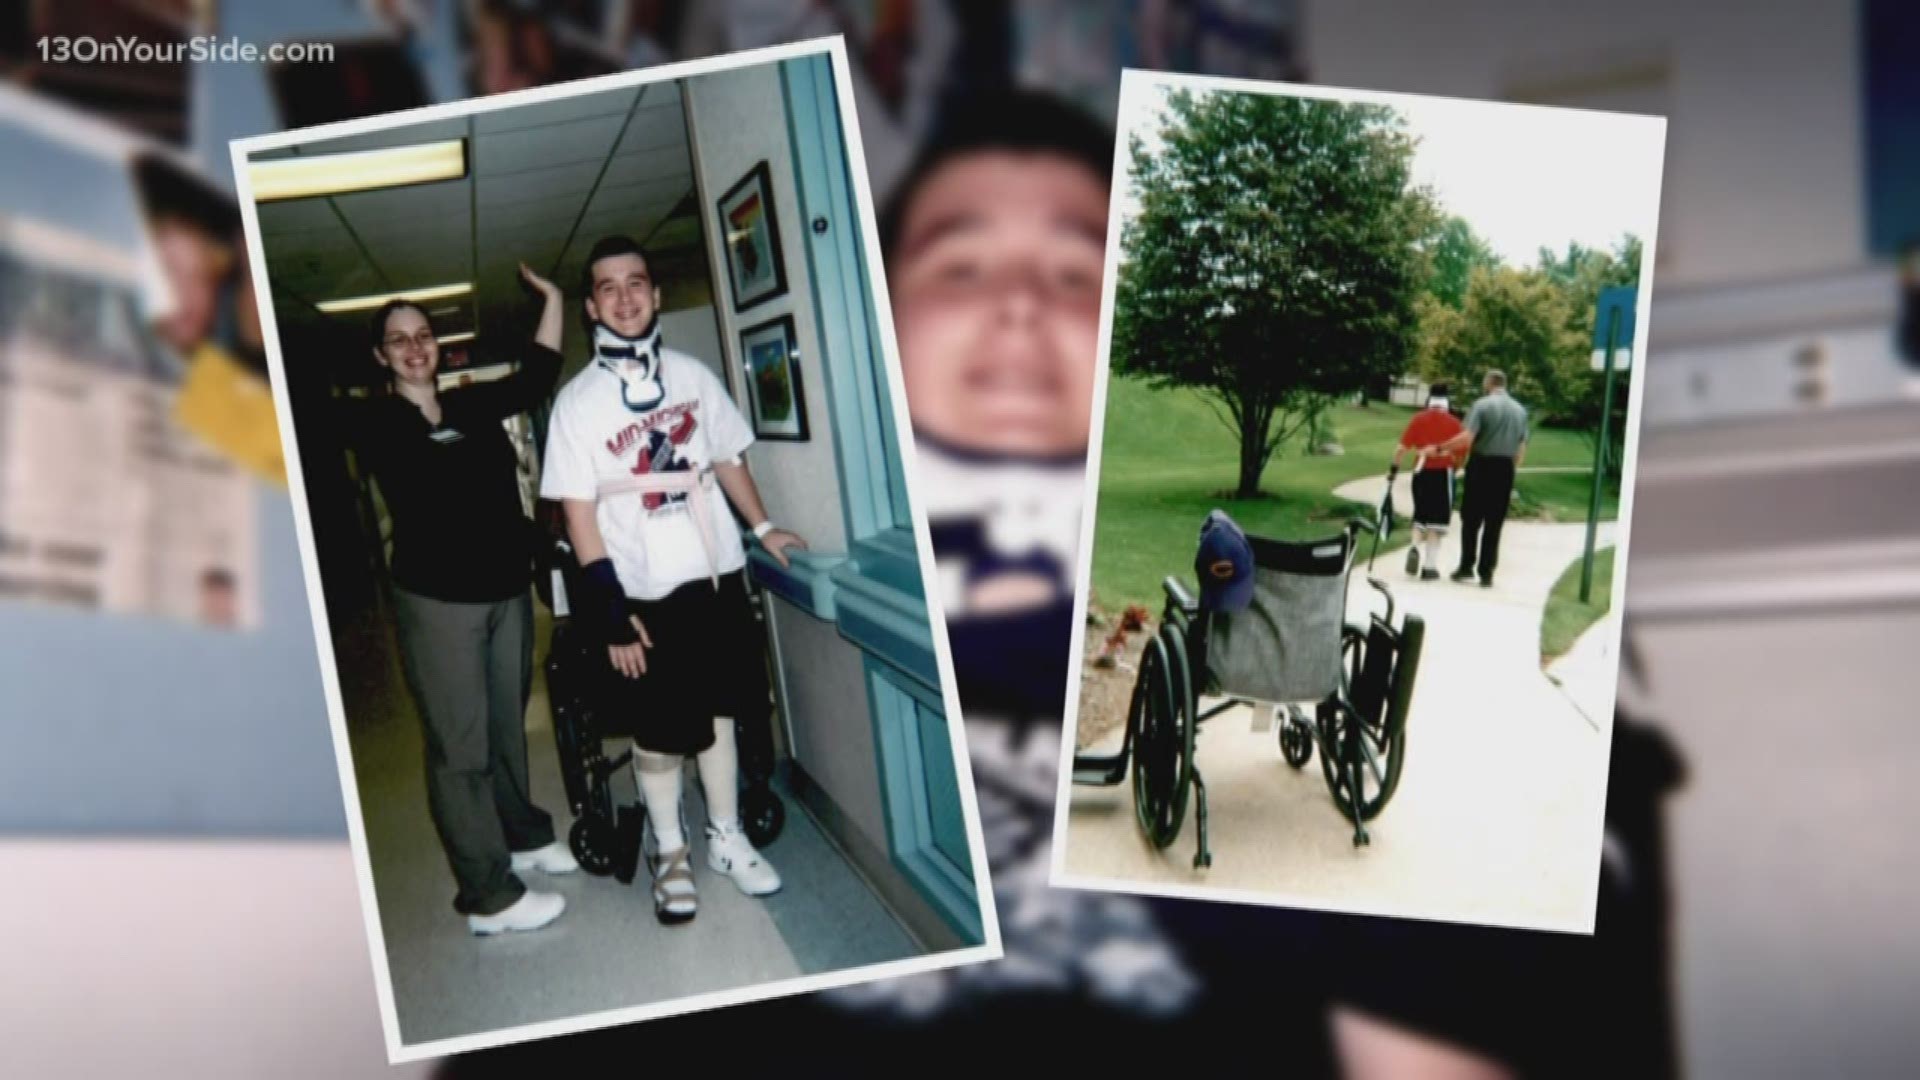 15 years ago, Cameron Tacey injured his spinal cord. Doctors didn't know if he'd make it.